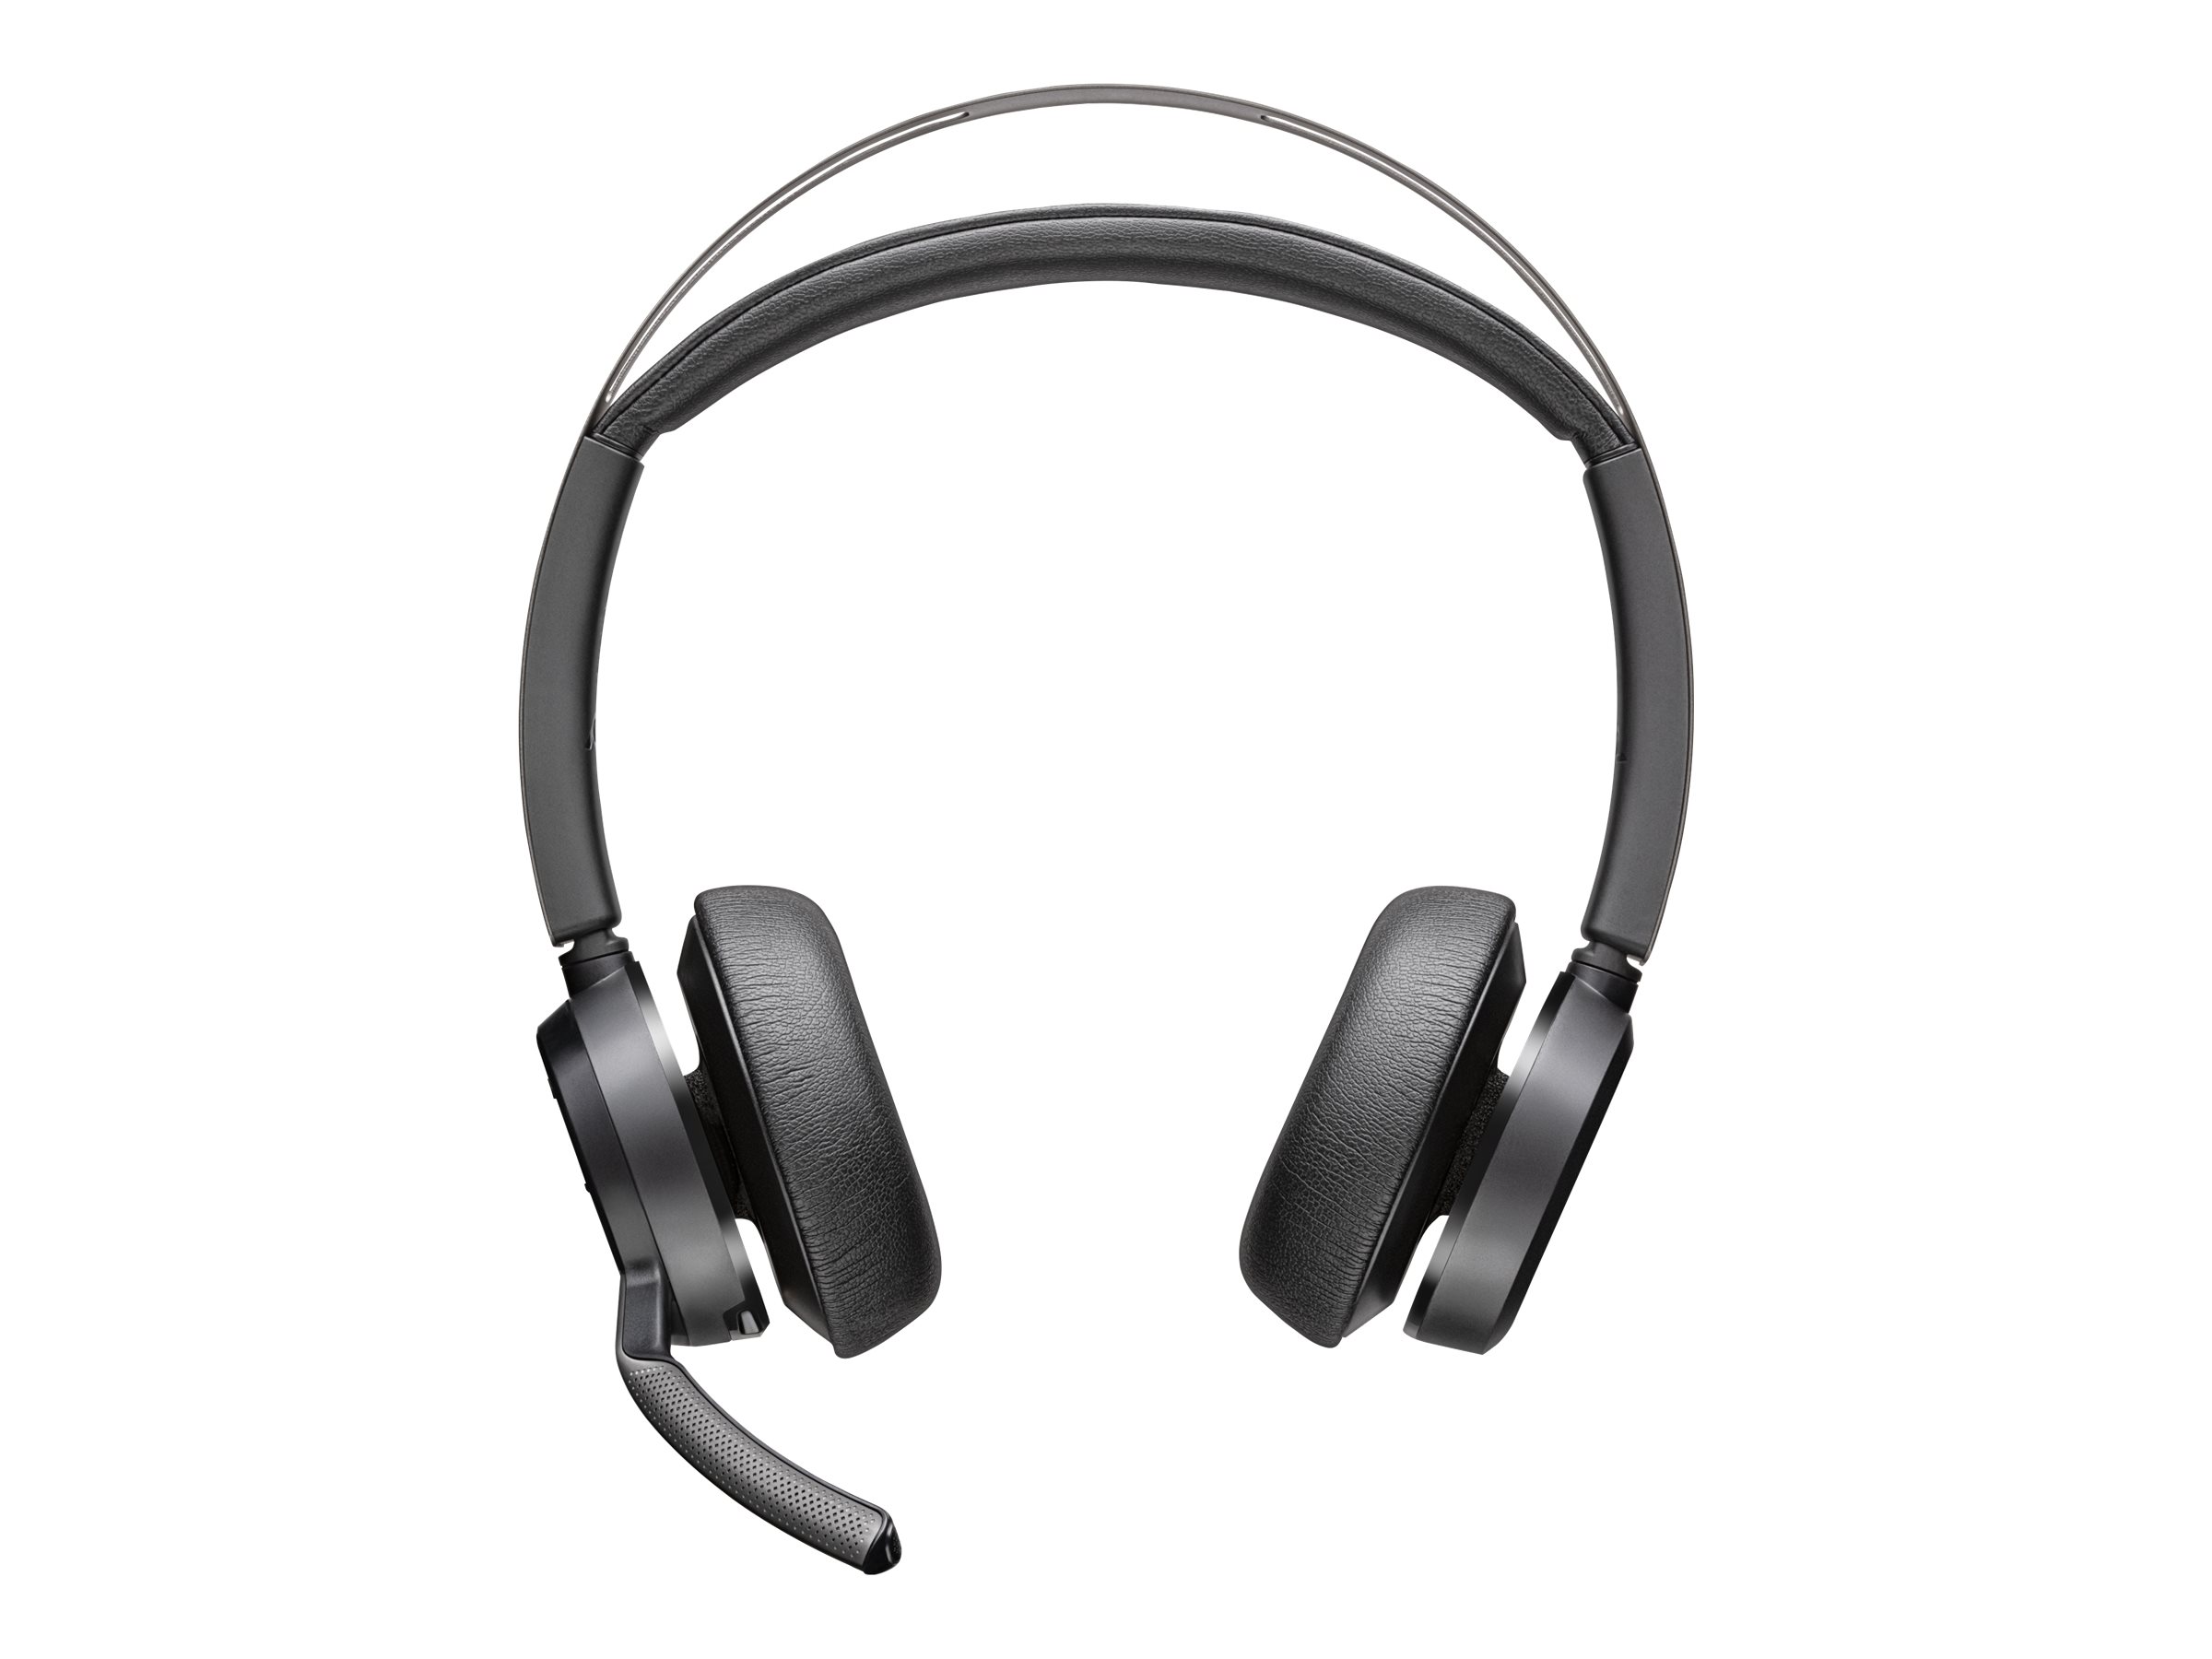 HP Poly Voyager Focus 2 - Headset - On-Ear - Bluetooth